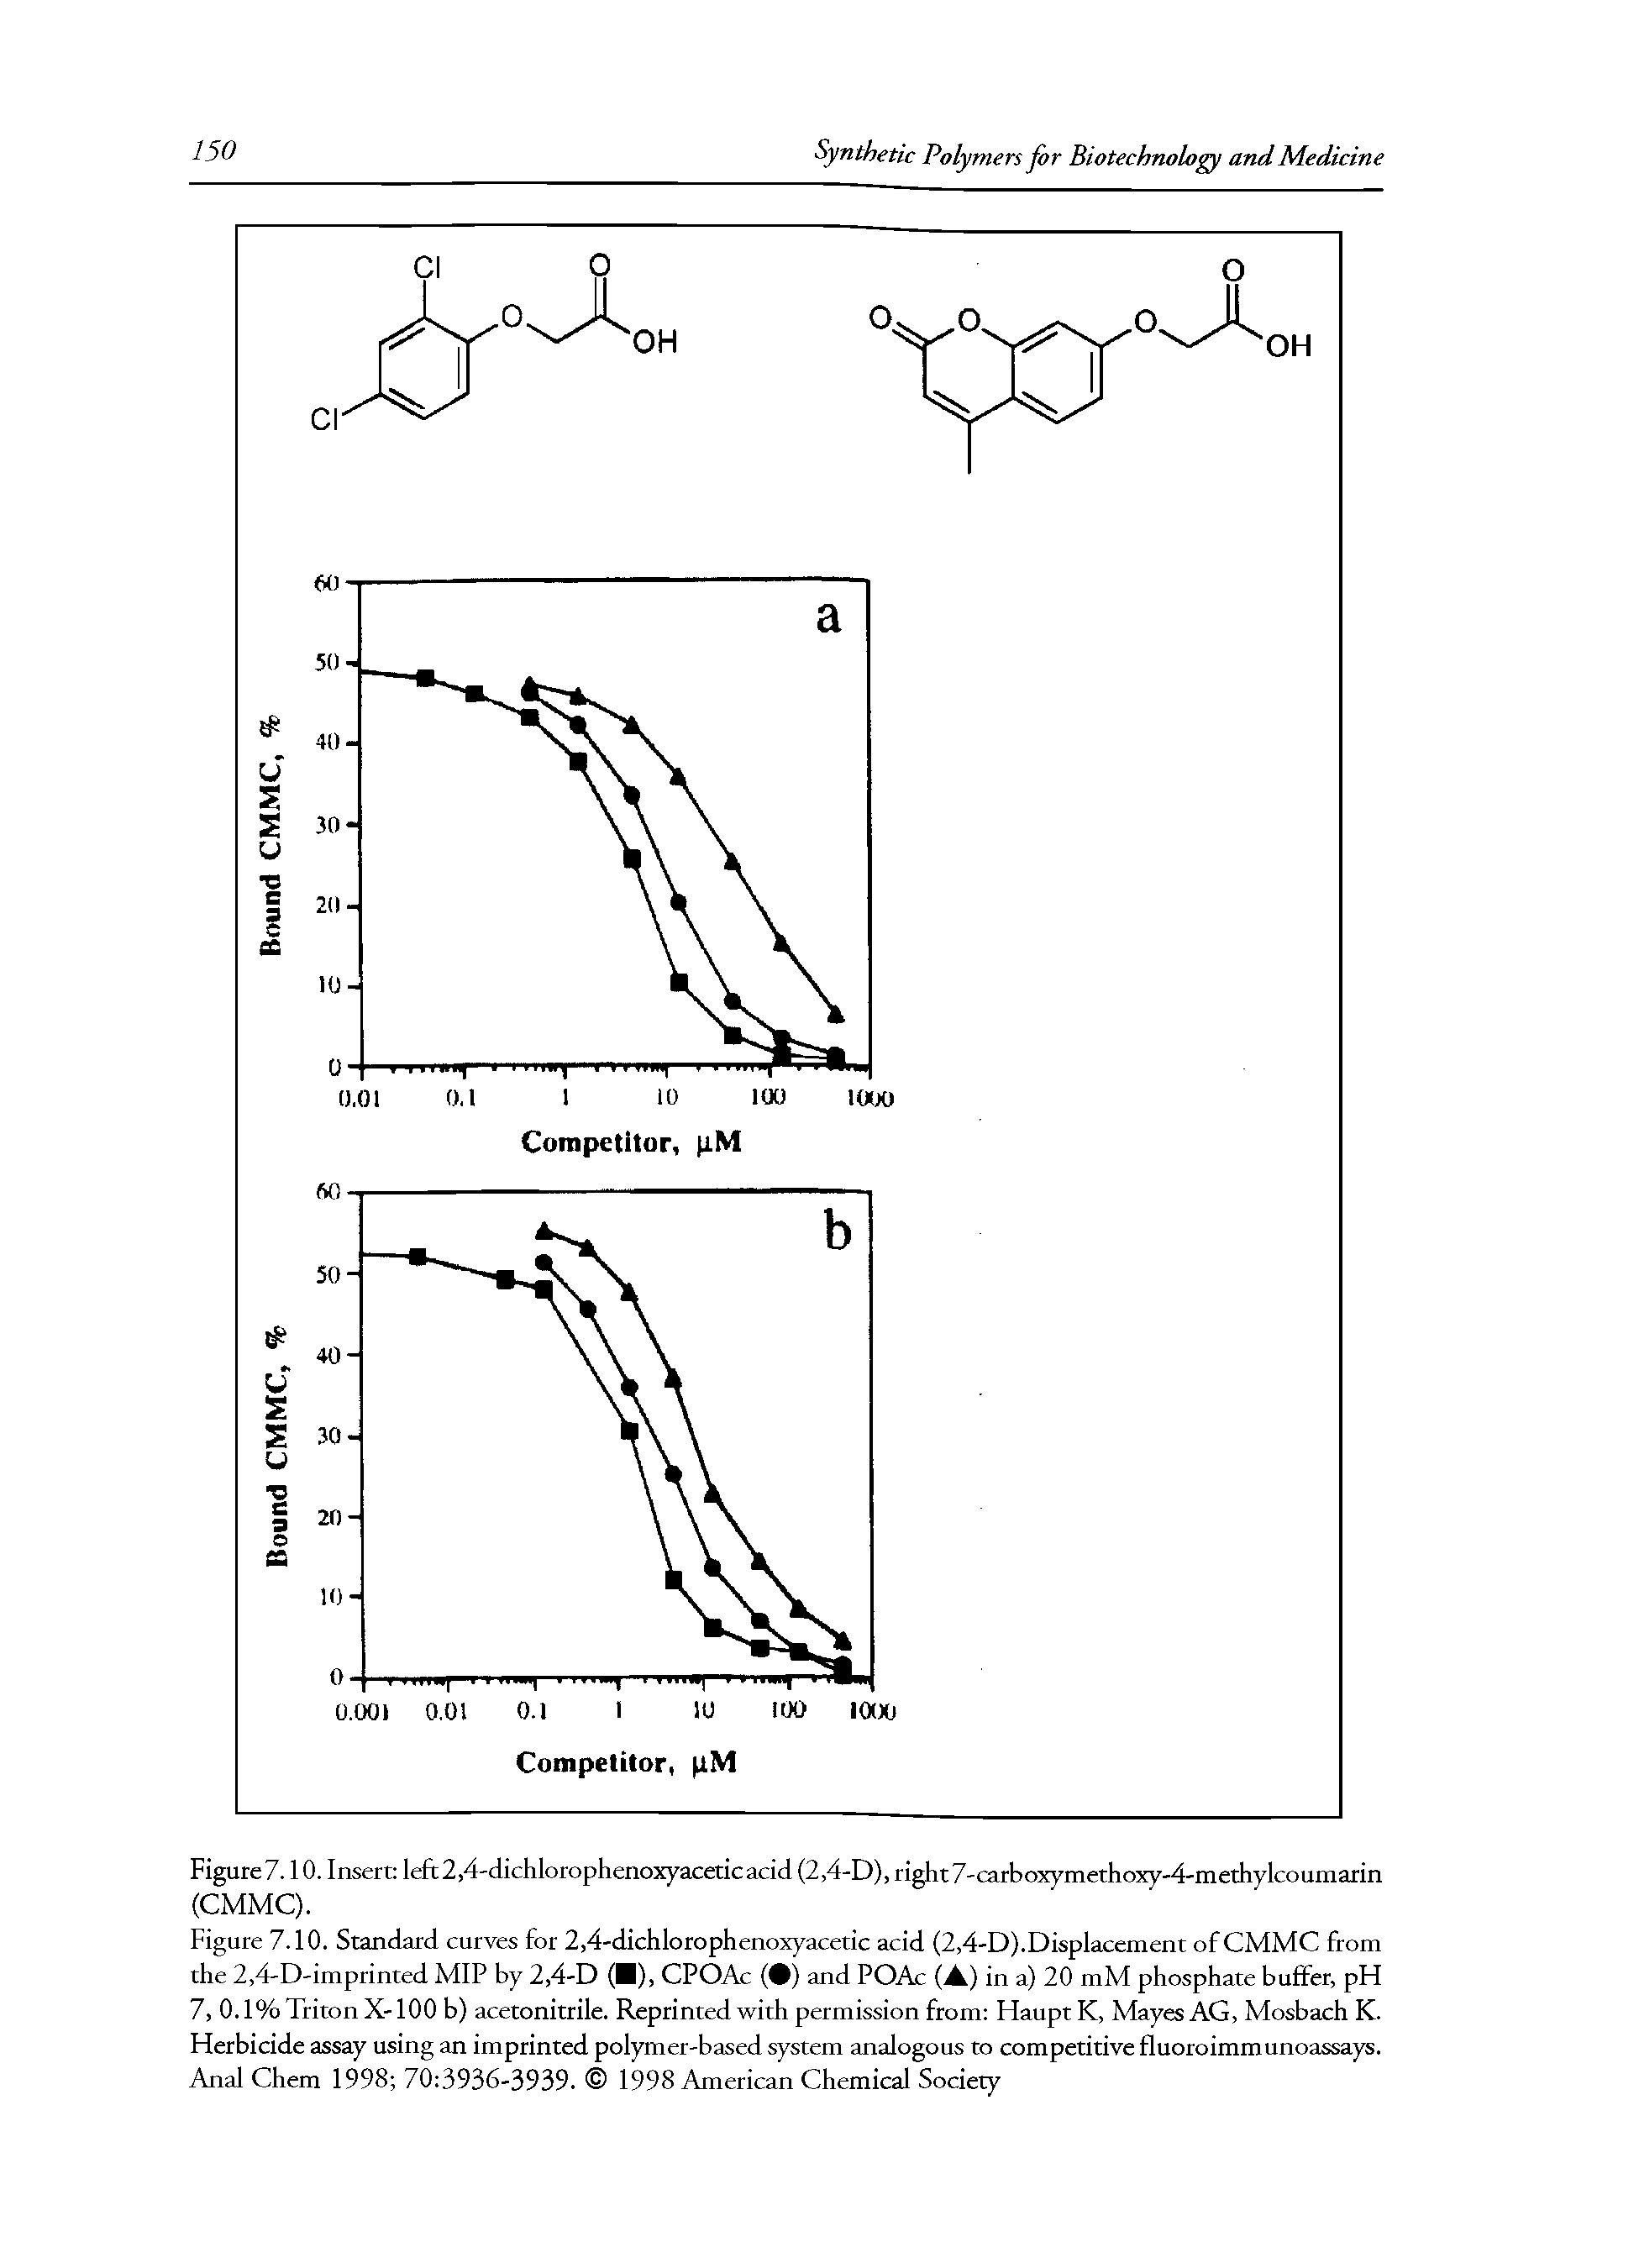 Figure 7.10. Standard curves for 2,4-dichlorophenoxyacetic acid (2,4-D).Displacement of CMMC from the 2,4-D-imprinted MIP by 2,4-D (I), CPOAc ( ) and POAc (A) in a) 20 mM phosphate buffer, pFf 7, 0.1% Triton X-100 b) acetonitrile. Reprinted with permission from Haupt K, Mayes AG, Mosbach K. Herbicide assay using an imprinted polymer-based system analogous to competitive fluoroimmunoassays. Anal Chem 1998 70 3936-3939. 1998 American Chemical Society...